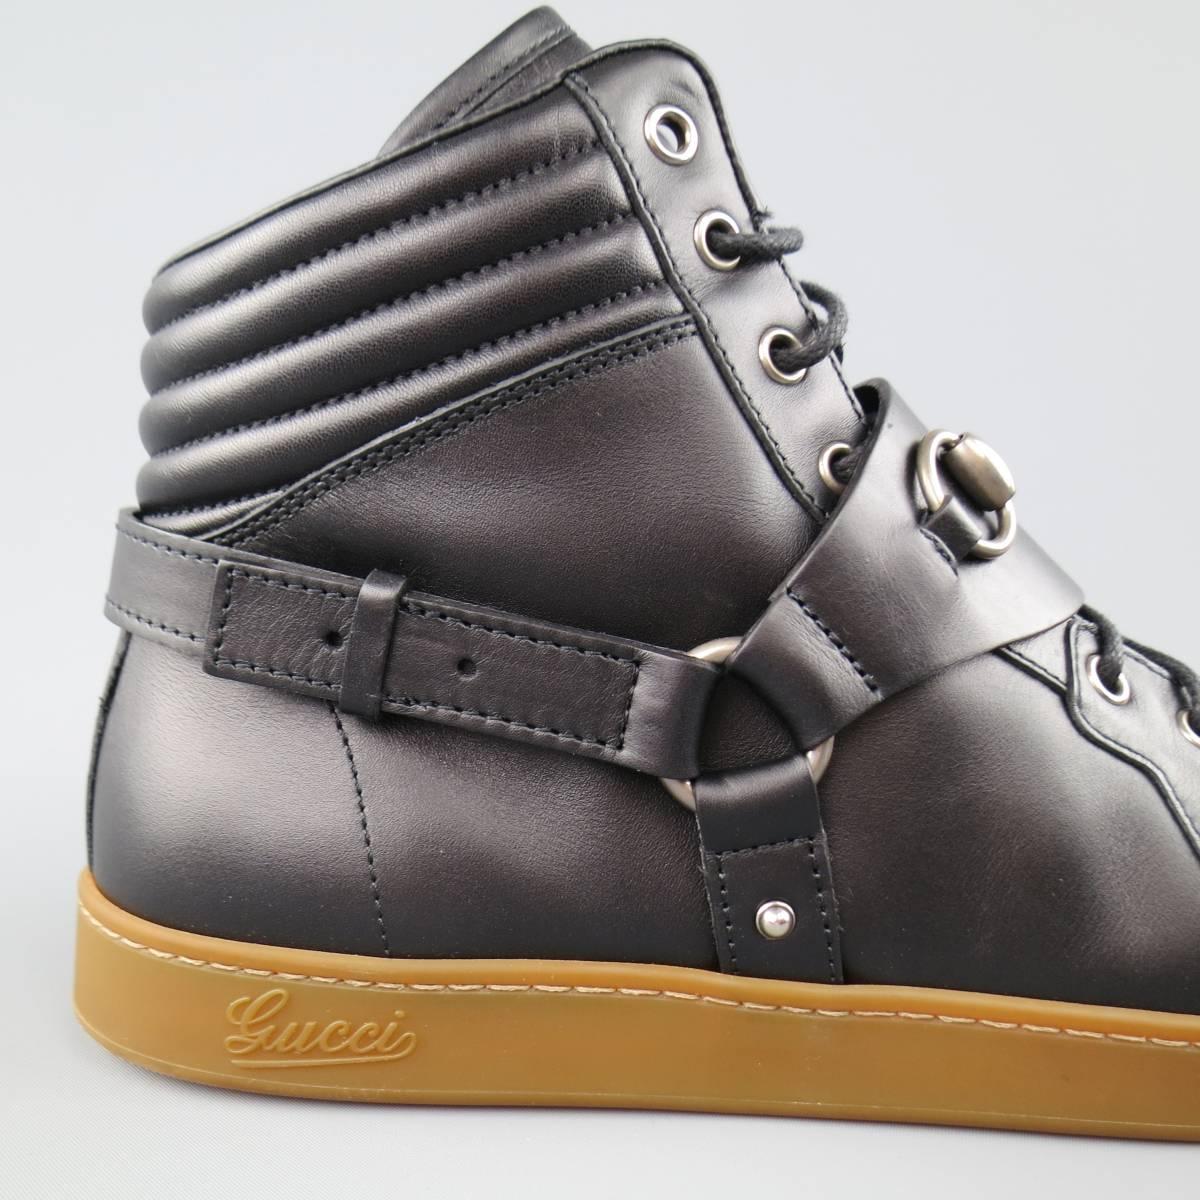 GUCCI HighTop Sneakers consists of leather material in a black color tone. 
Designed with a harness strap, horse-bit in silver tone over black laces. Brown rubber sole. Comes with original box and dust bag. Made in Italy.
 
Excellent Pre-Owned